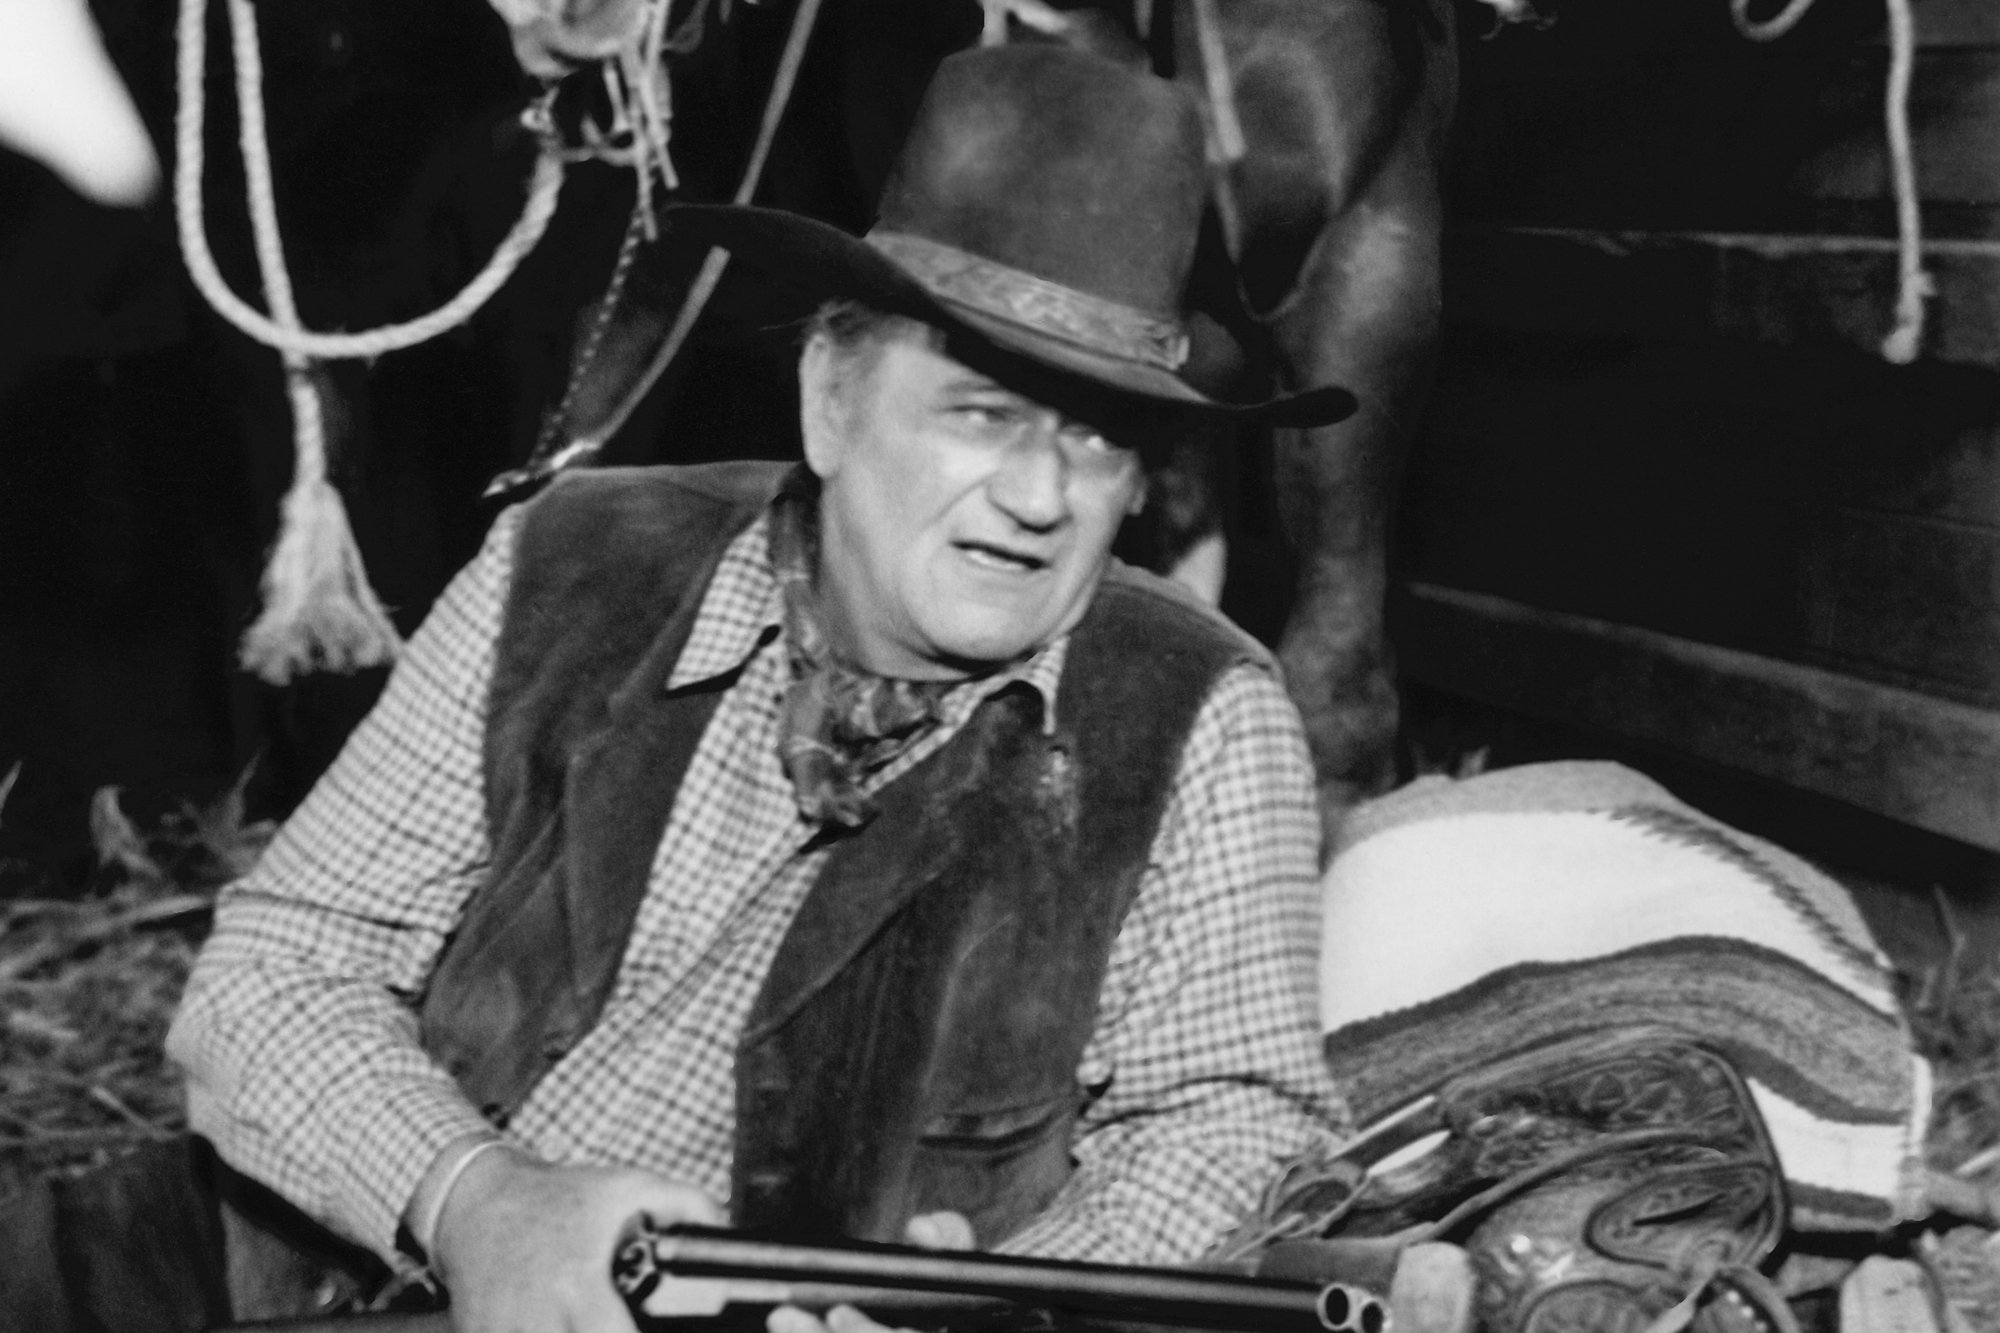 'Cahill U.S. Marshal' John Wayne as J.D. Cahill wearing his Western uniform and holding a gun in front of a horse.